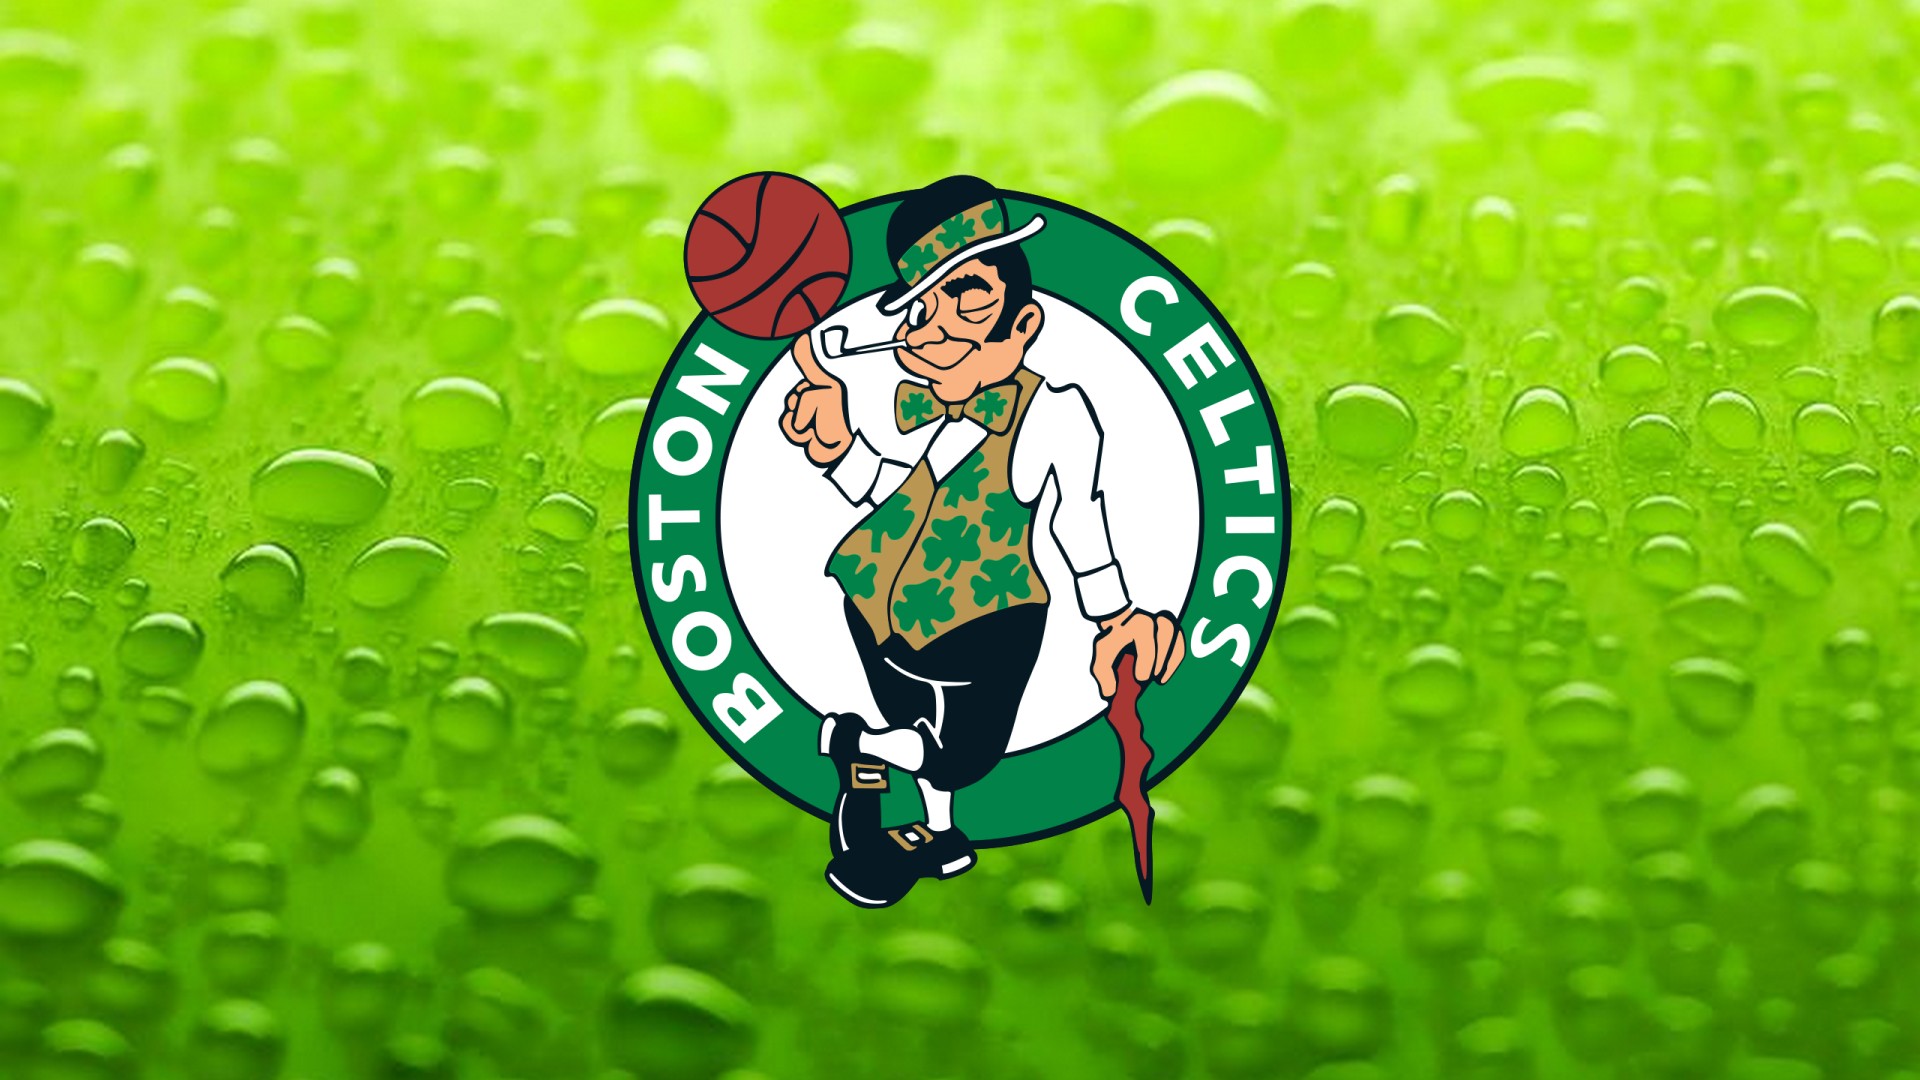 Backgrounds Boston Celtics HD with image dimensions 1920x1080 pixel. You can make this wallpaper for your Desktop Computer Backgrounds, Windows or Mac Screensavers, iPhone Lock screen, Tablet or Android and another Mobile Phone device